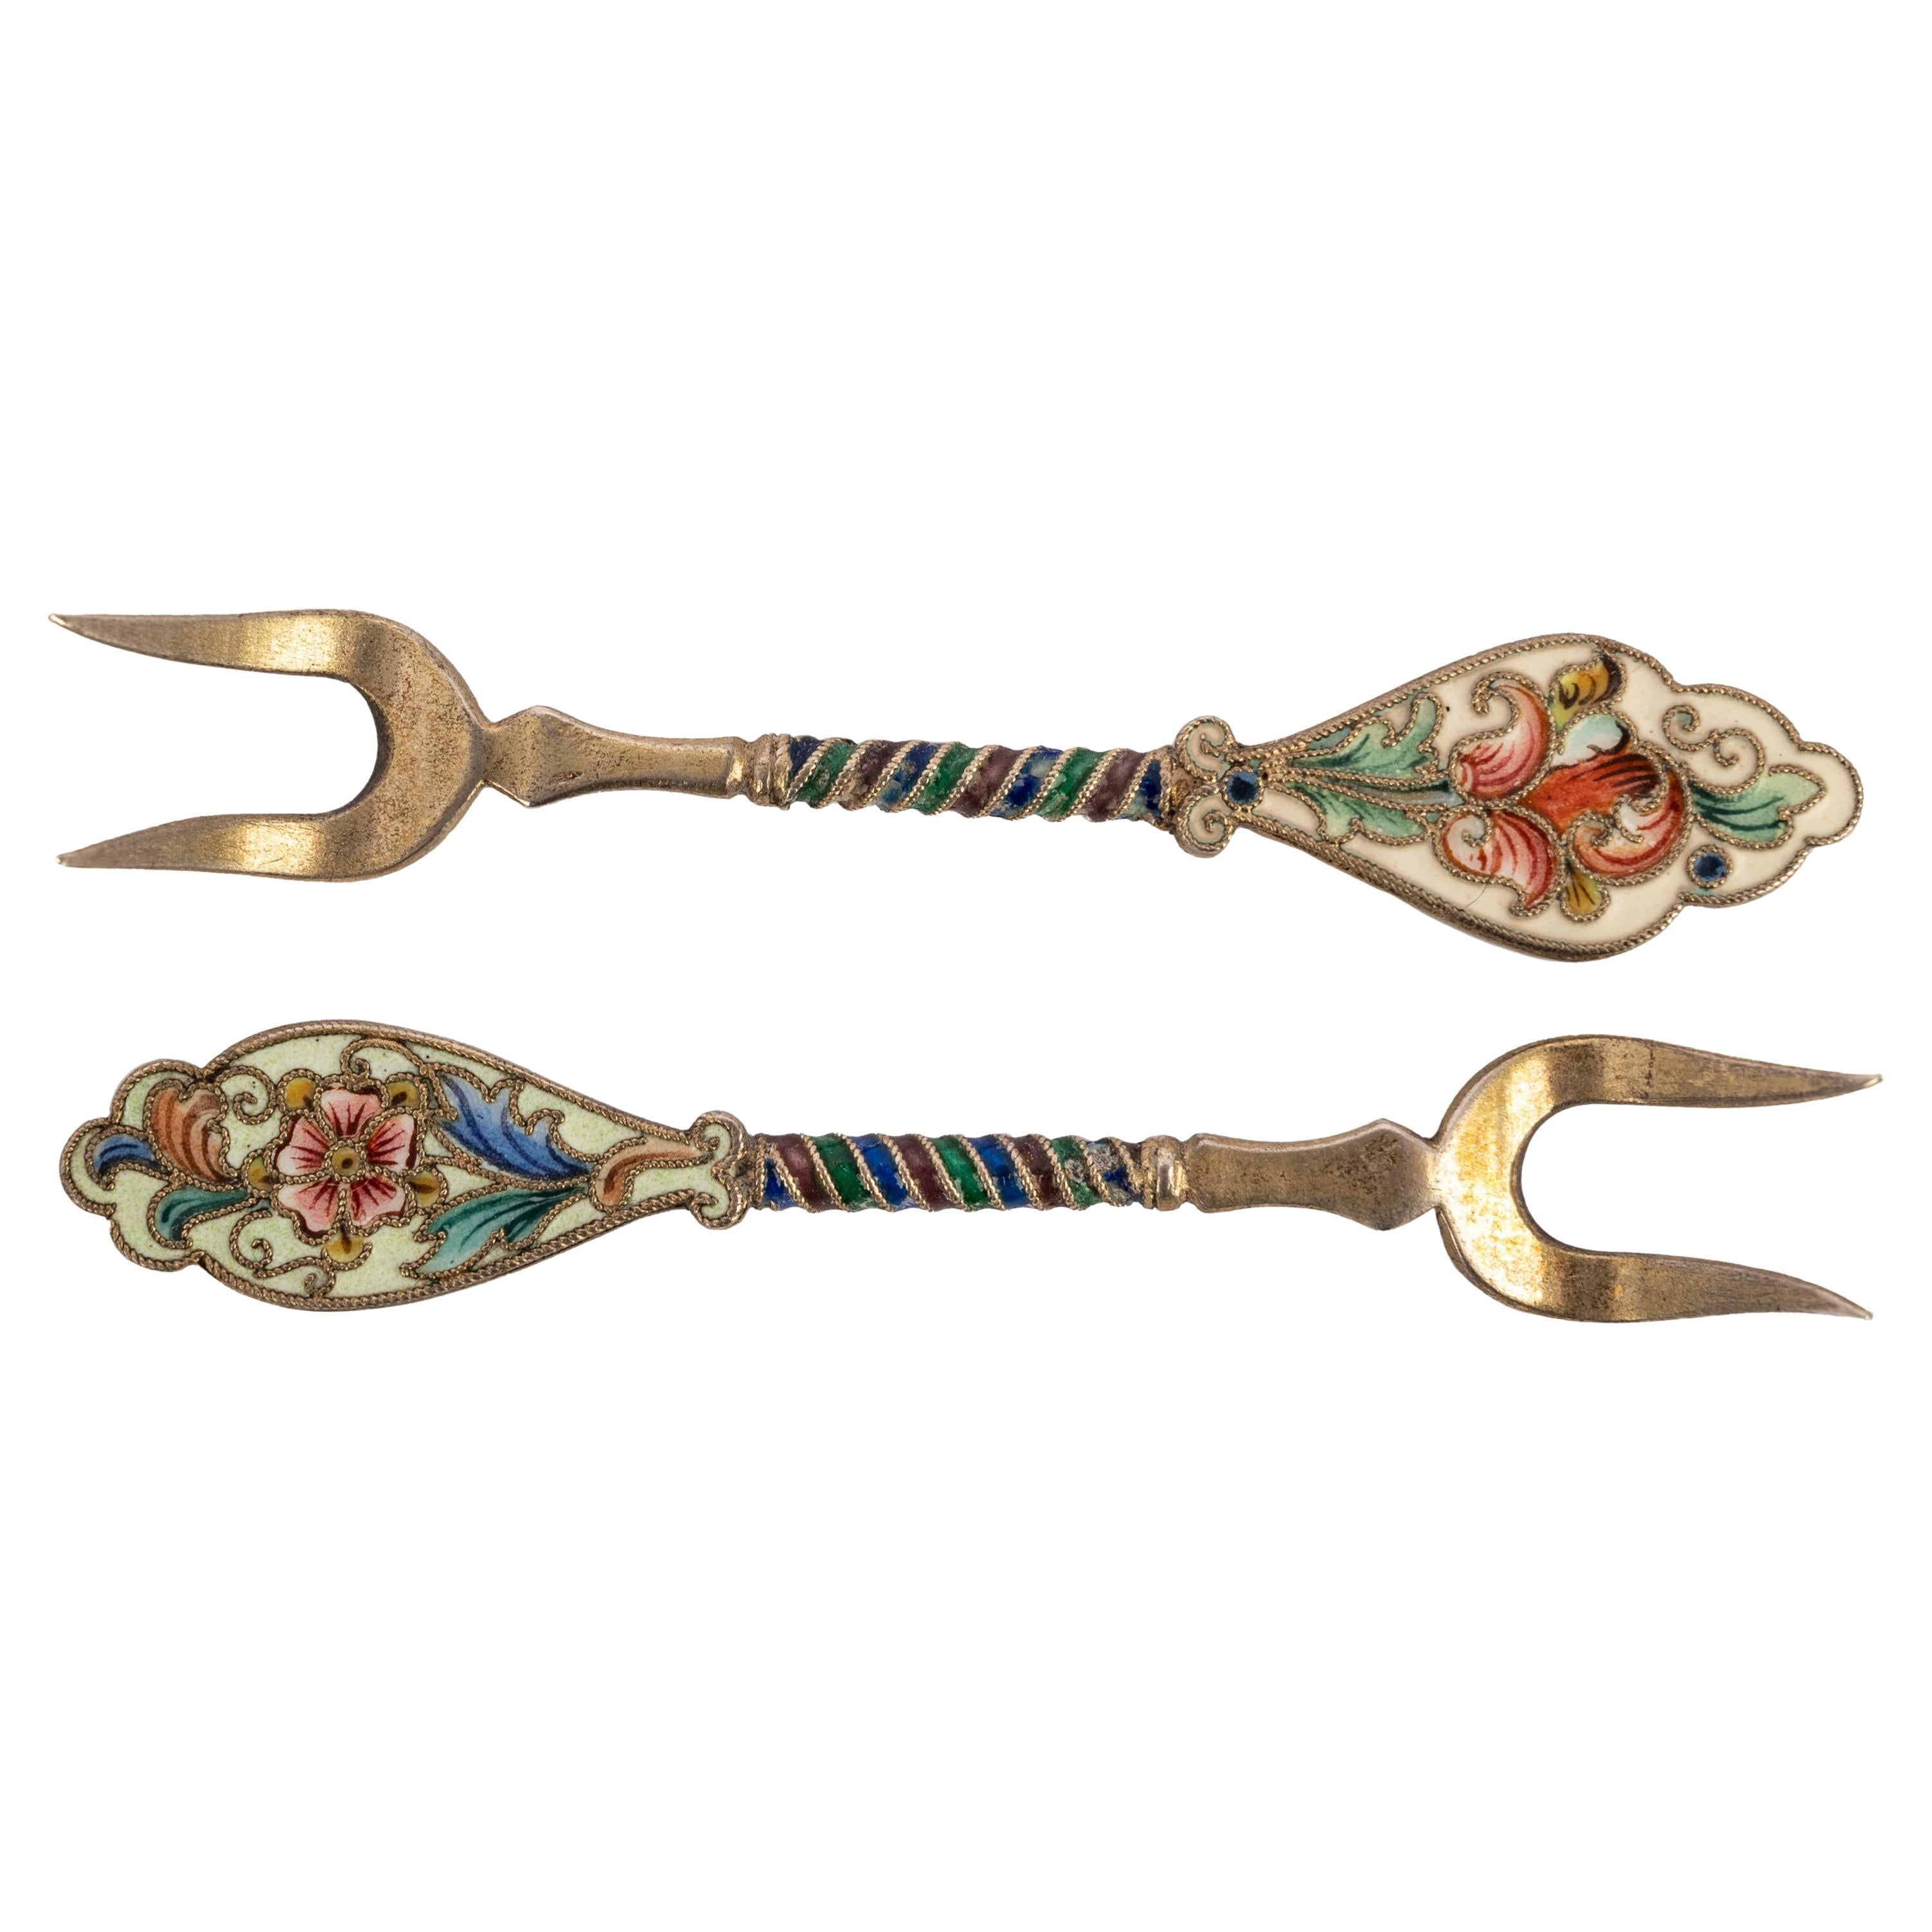 Pair Antique Imperial Russian Silver Gilt Cloisonne Forks Feodor Ruckert Faberge